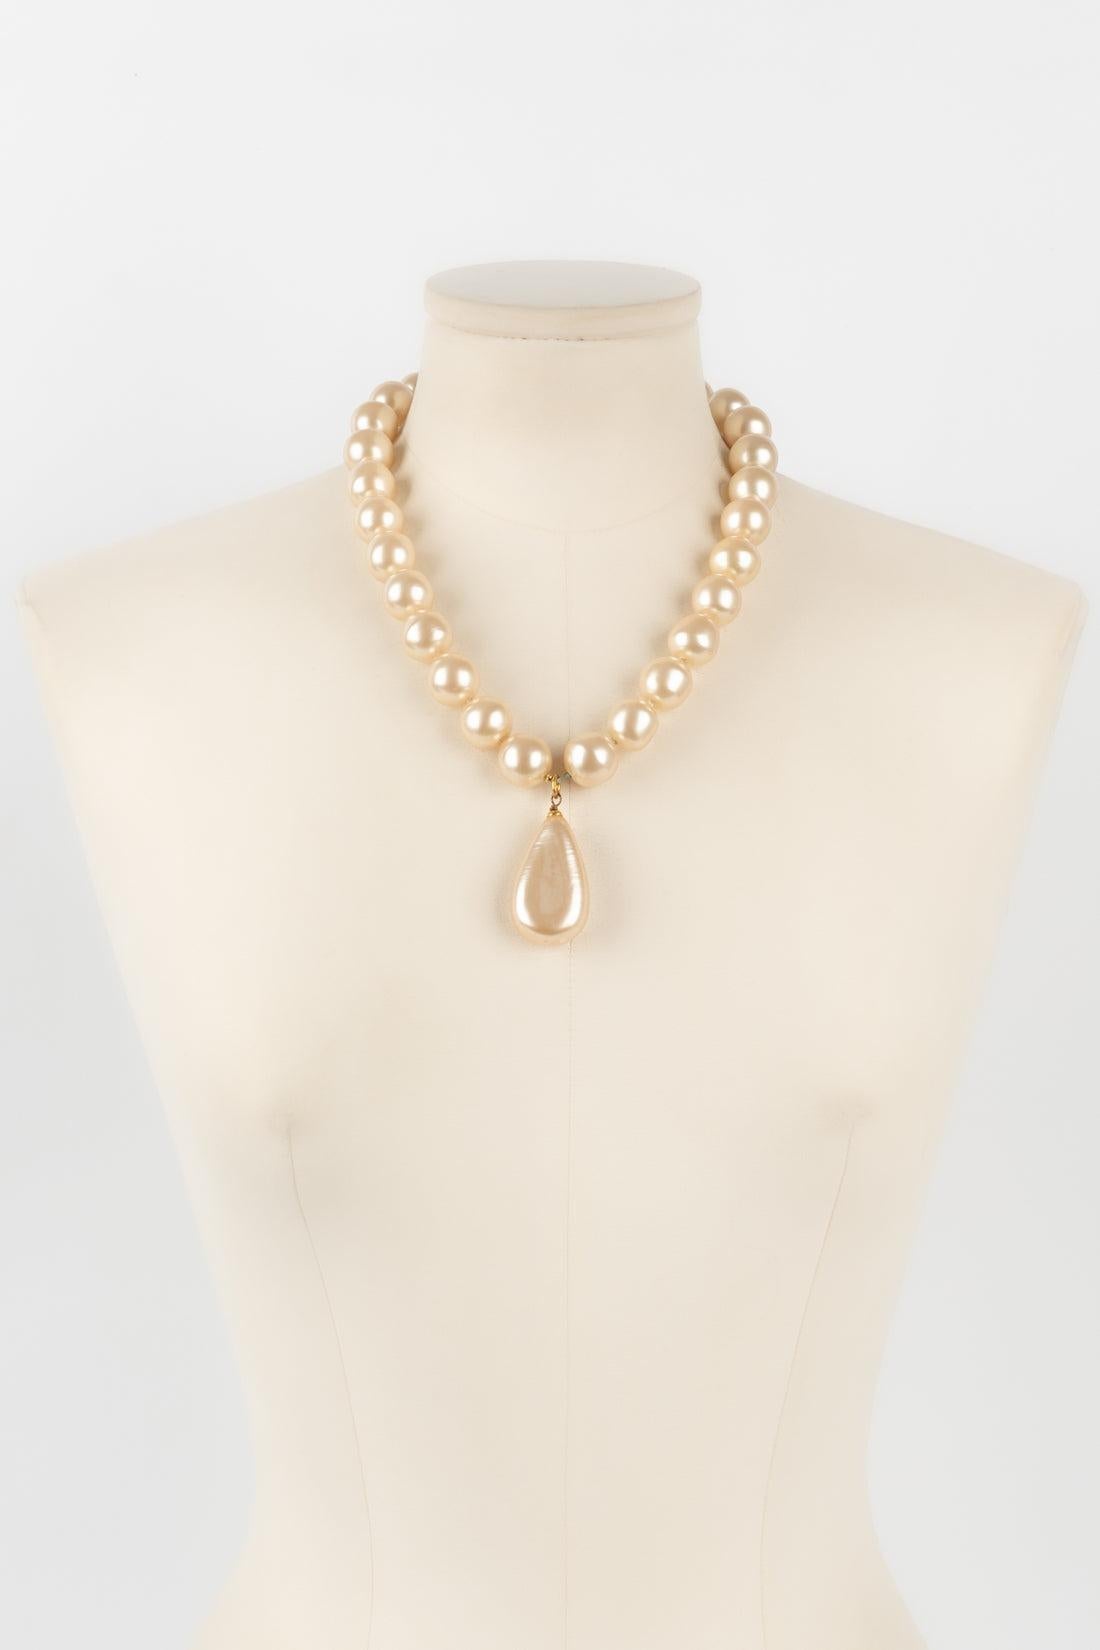 Chanel - (Made in France) Necklace with a golden metal fastener and costume pearls assembled with knots.

Additional information:
Condition: Very good condition
Dimensions: Length: 50 cm

Seller Reference: CB203
